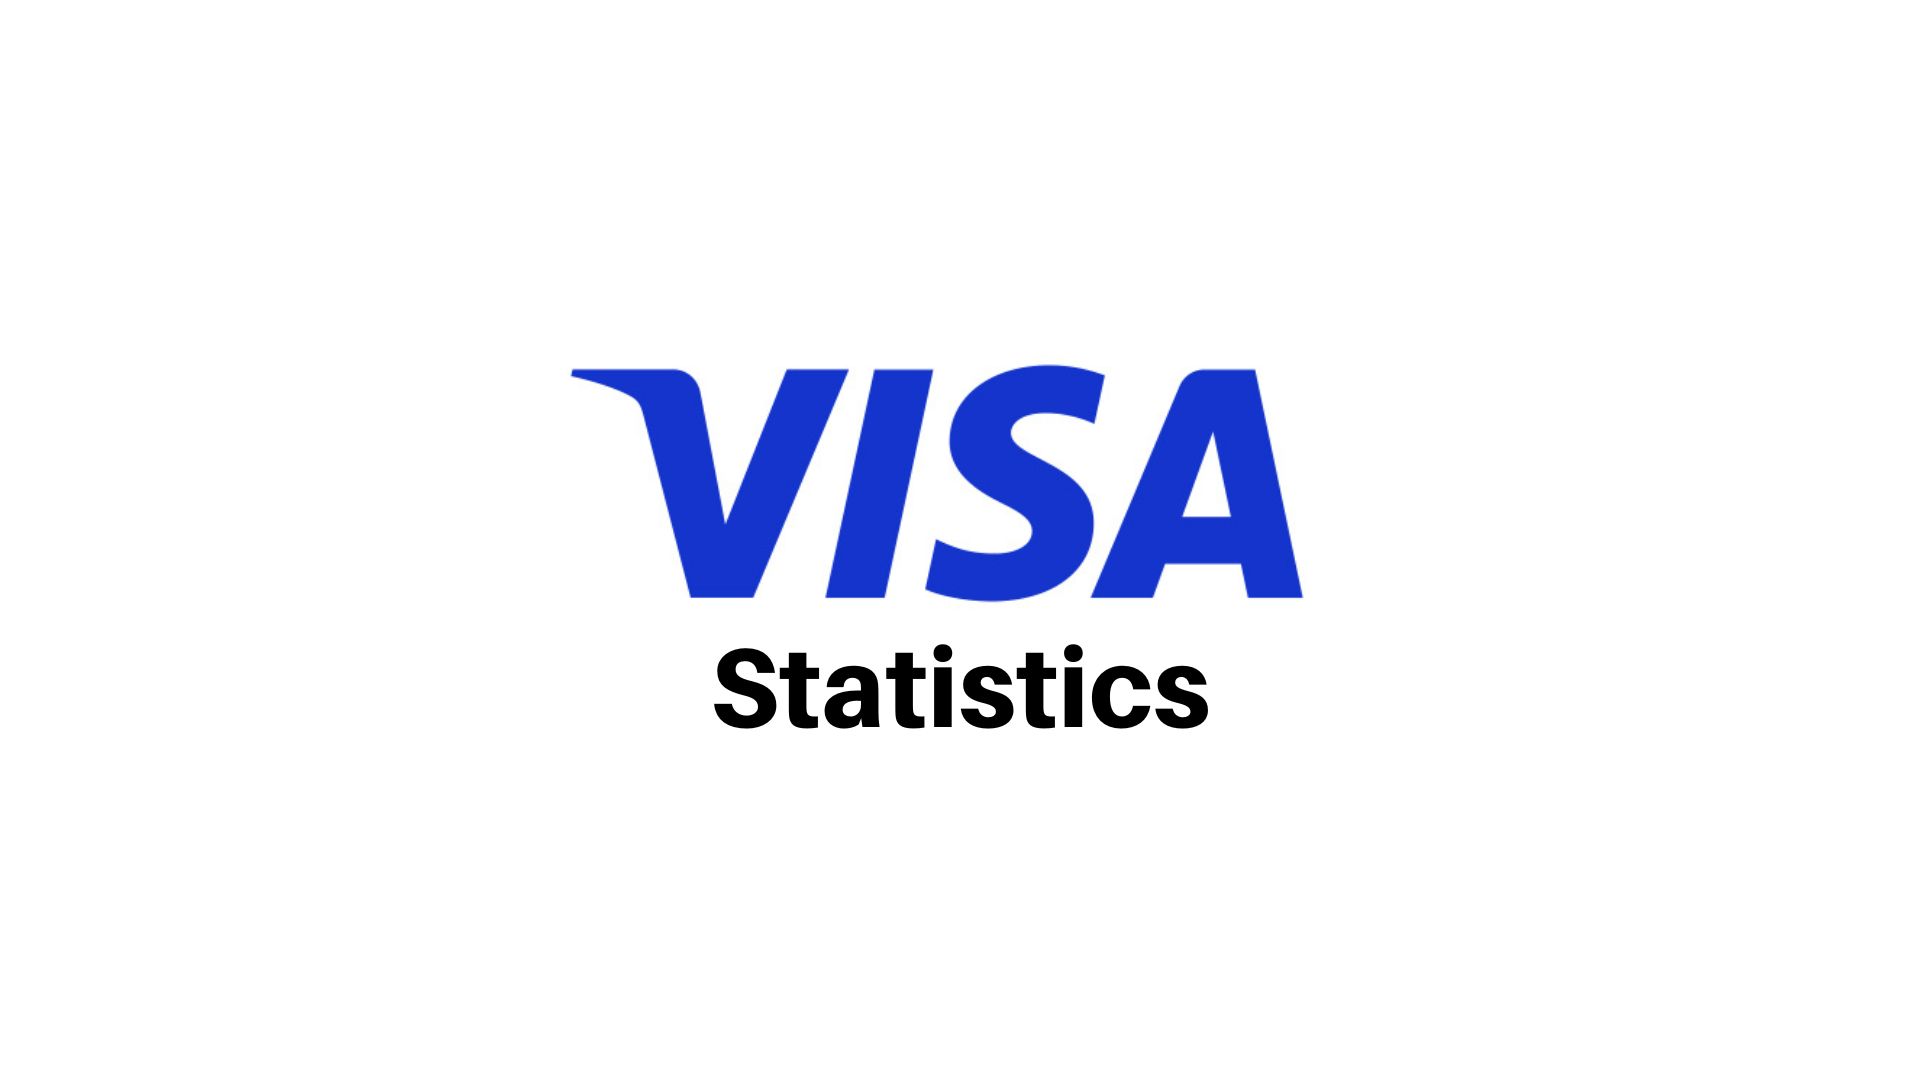 A Few Vital Visa Statistics To Understand Its Scale and Expansion Across The World